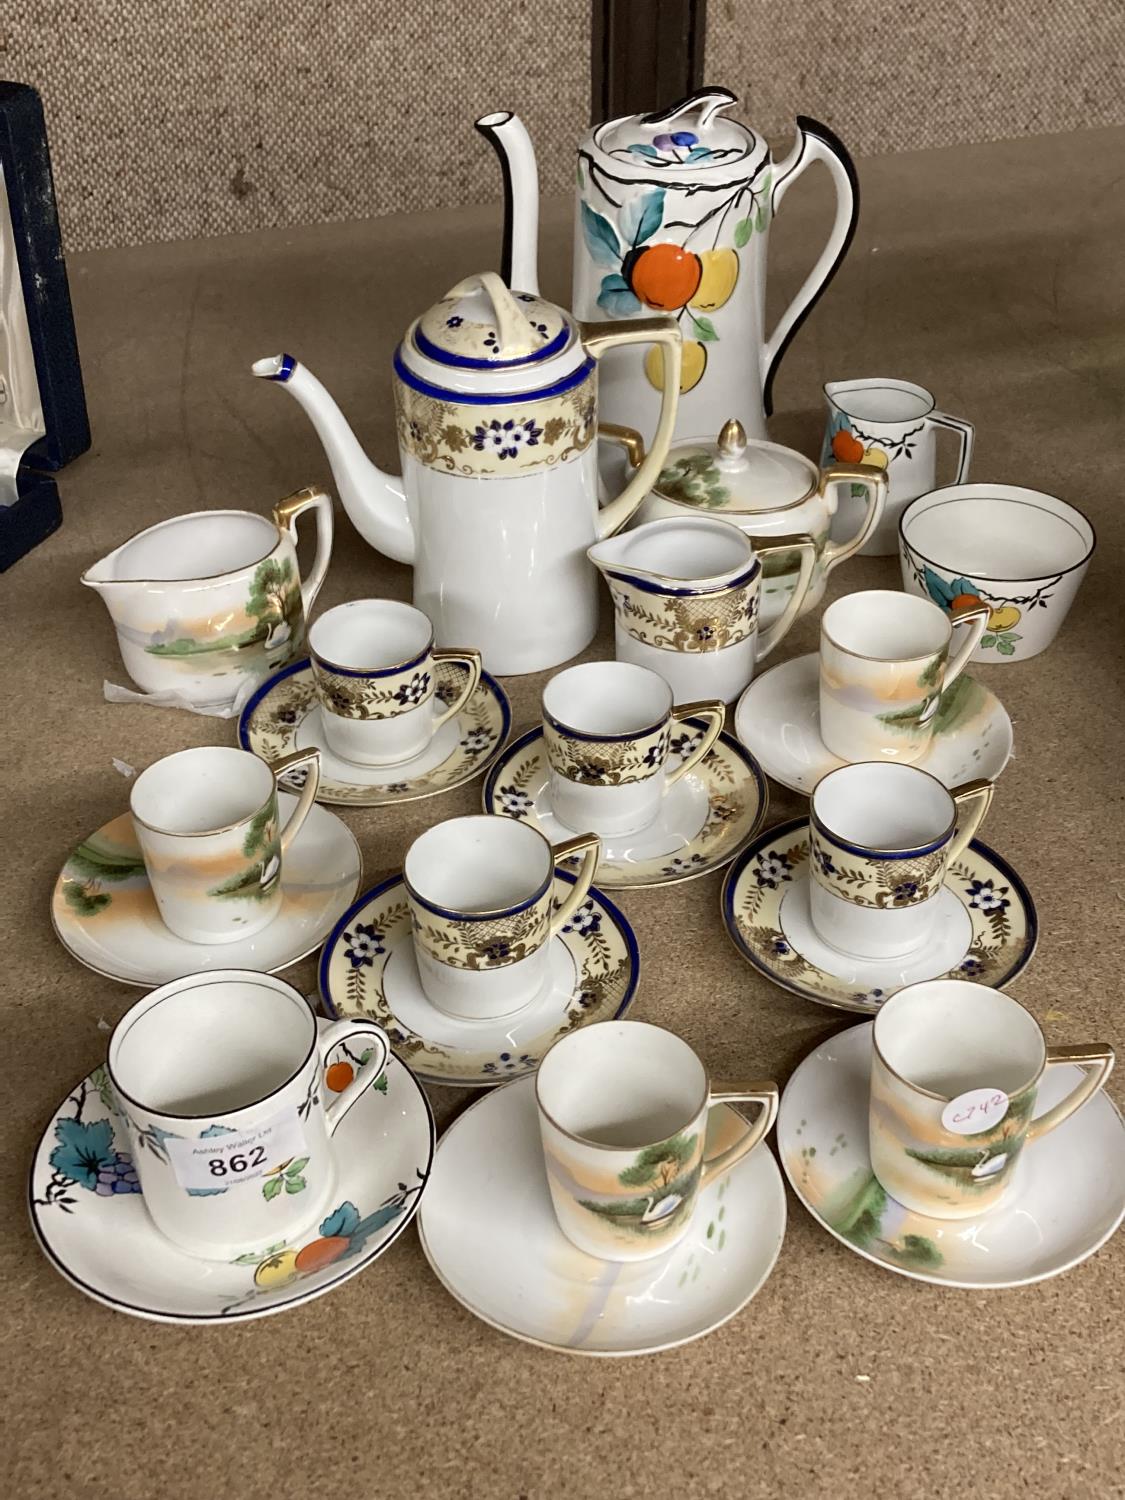 A QUANTITY OF TEAWARE TO INCLUDE A NORITAKE PART TEASET WITH COFFEE POT, CUPS, SAUCERS, CREAM JUG